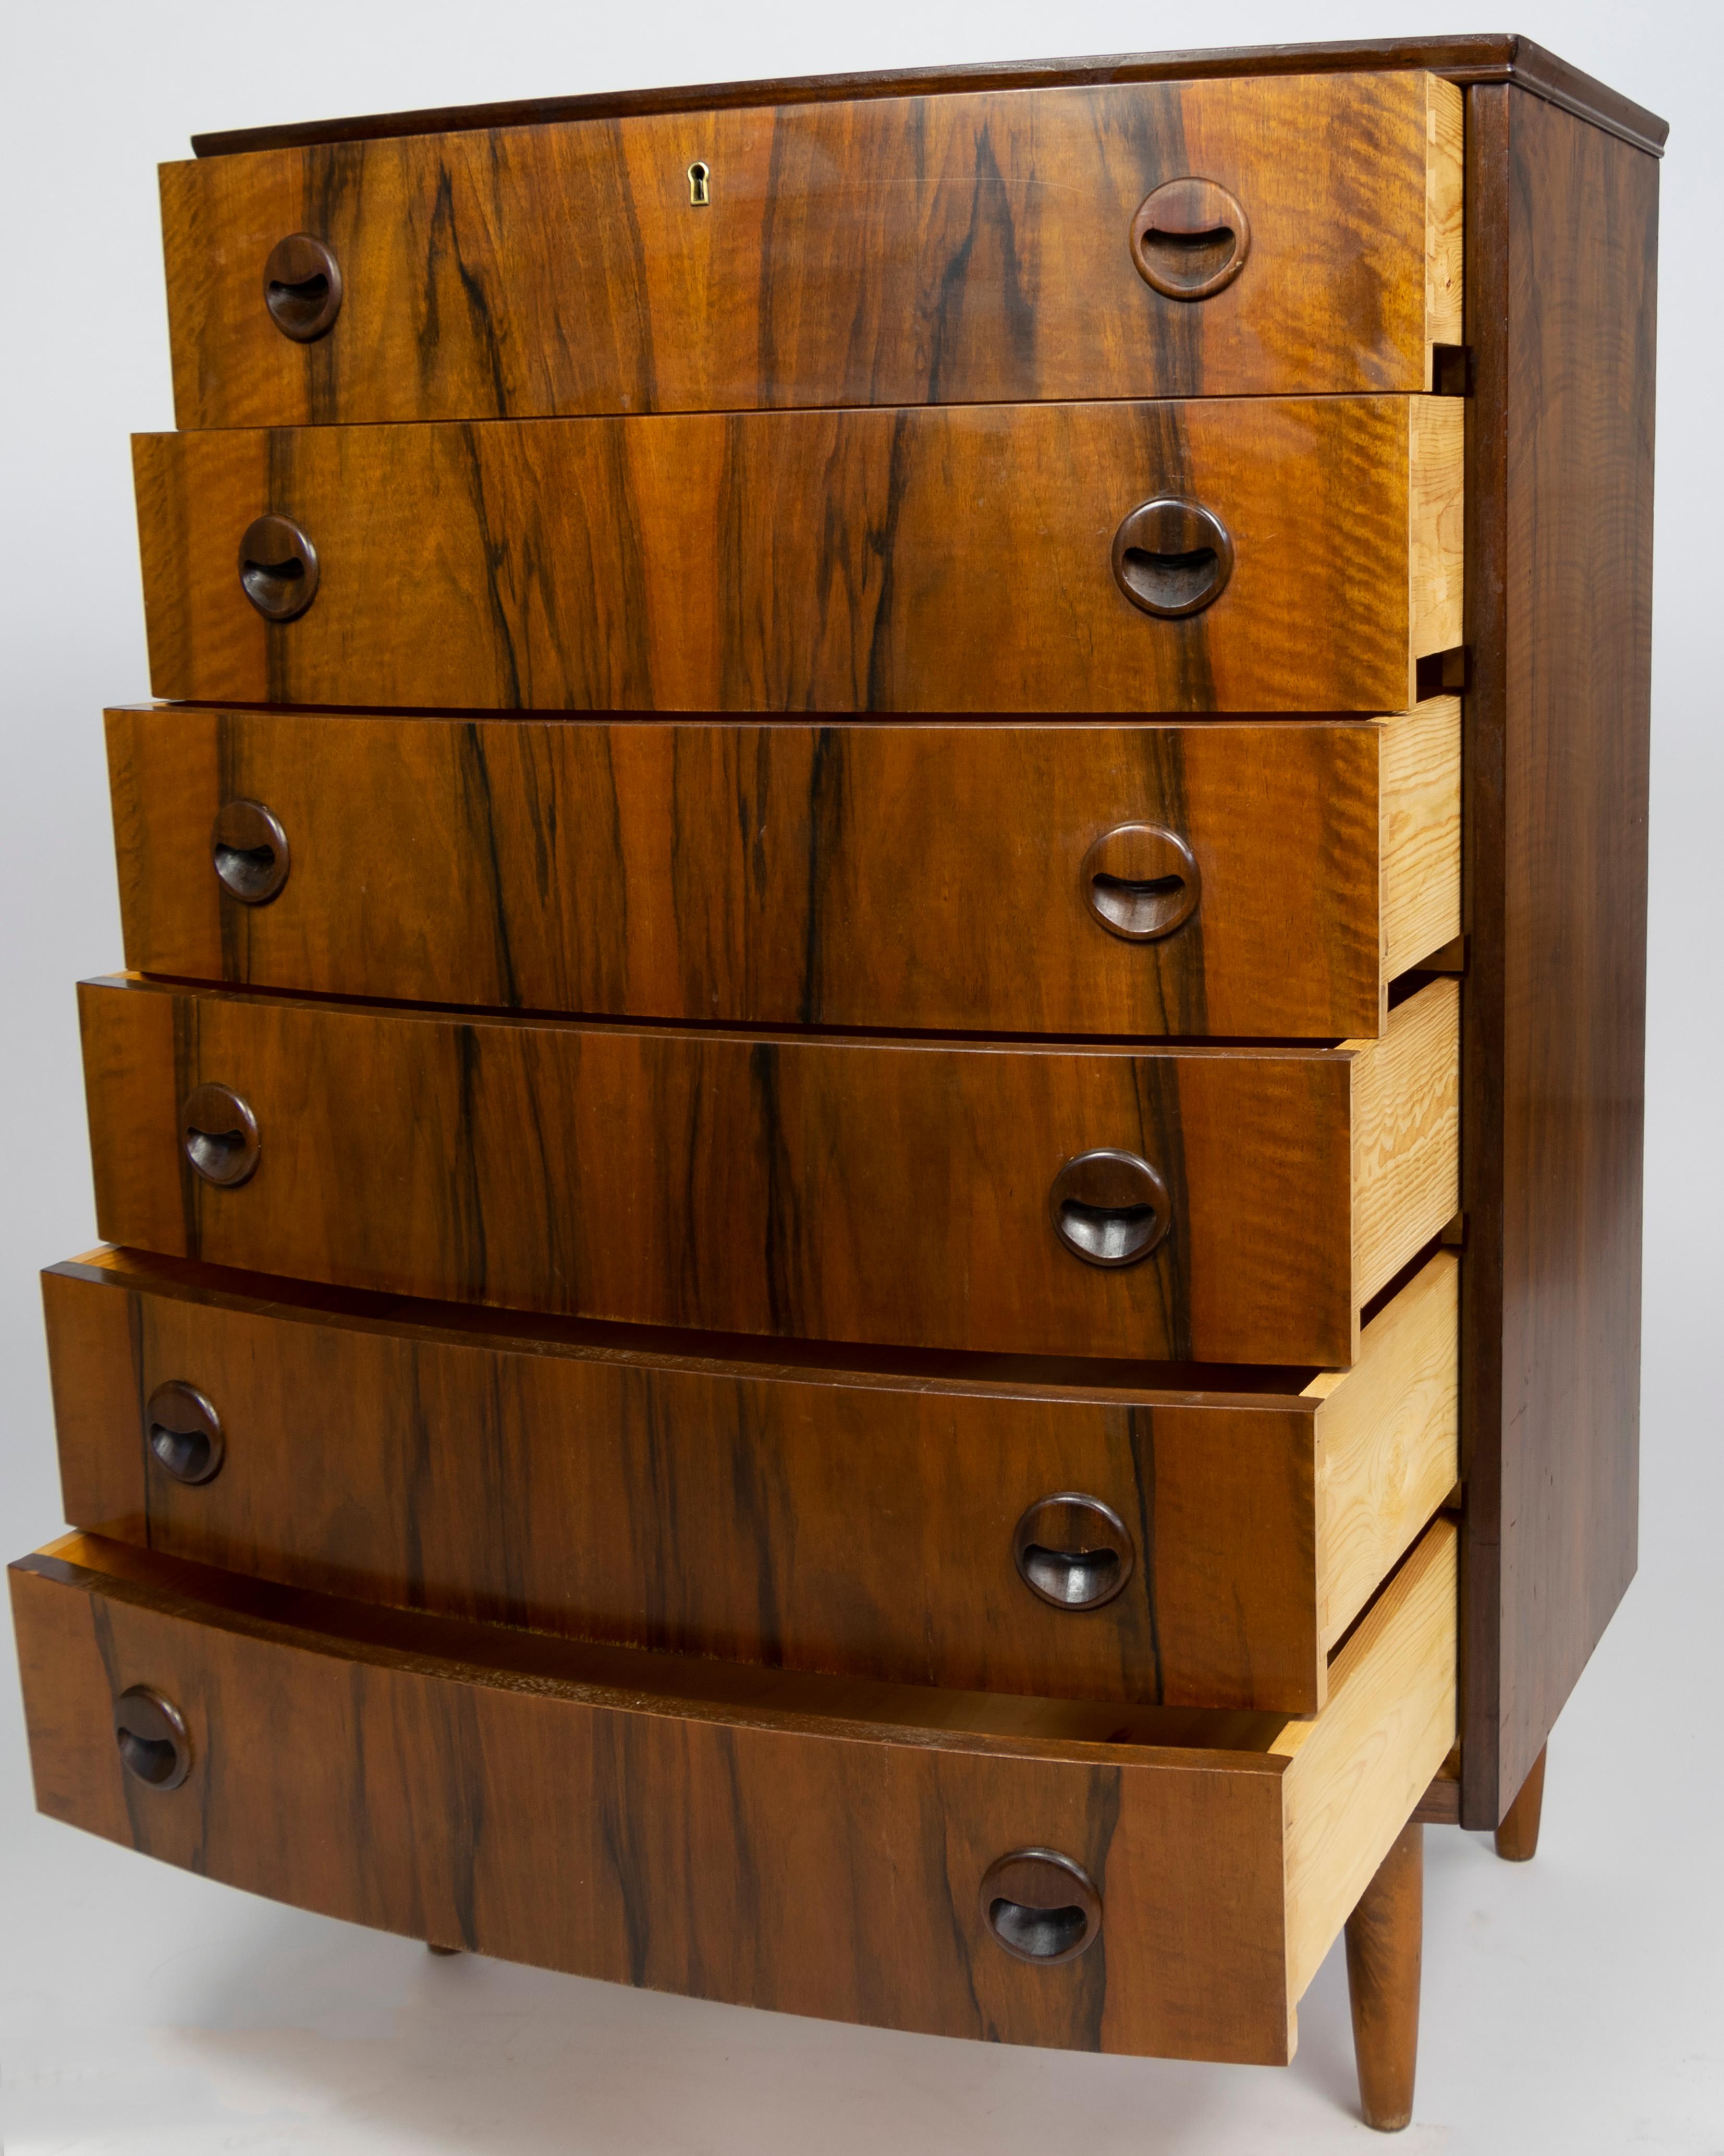 Beautiful Kai Kristensen chest of drawers in rosewood. 
The chest is Bow-fronted rosewood veneer with solid, sculpted rosewood drawer pulls. Afromosia teak legs.

Kristiansen finished his apprenticeship as a carpenter in 1947. Then he attended until